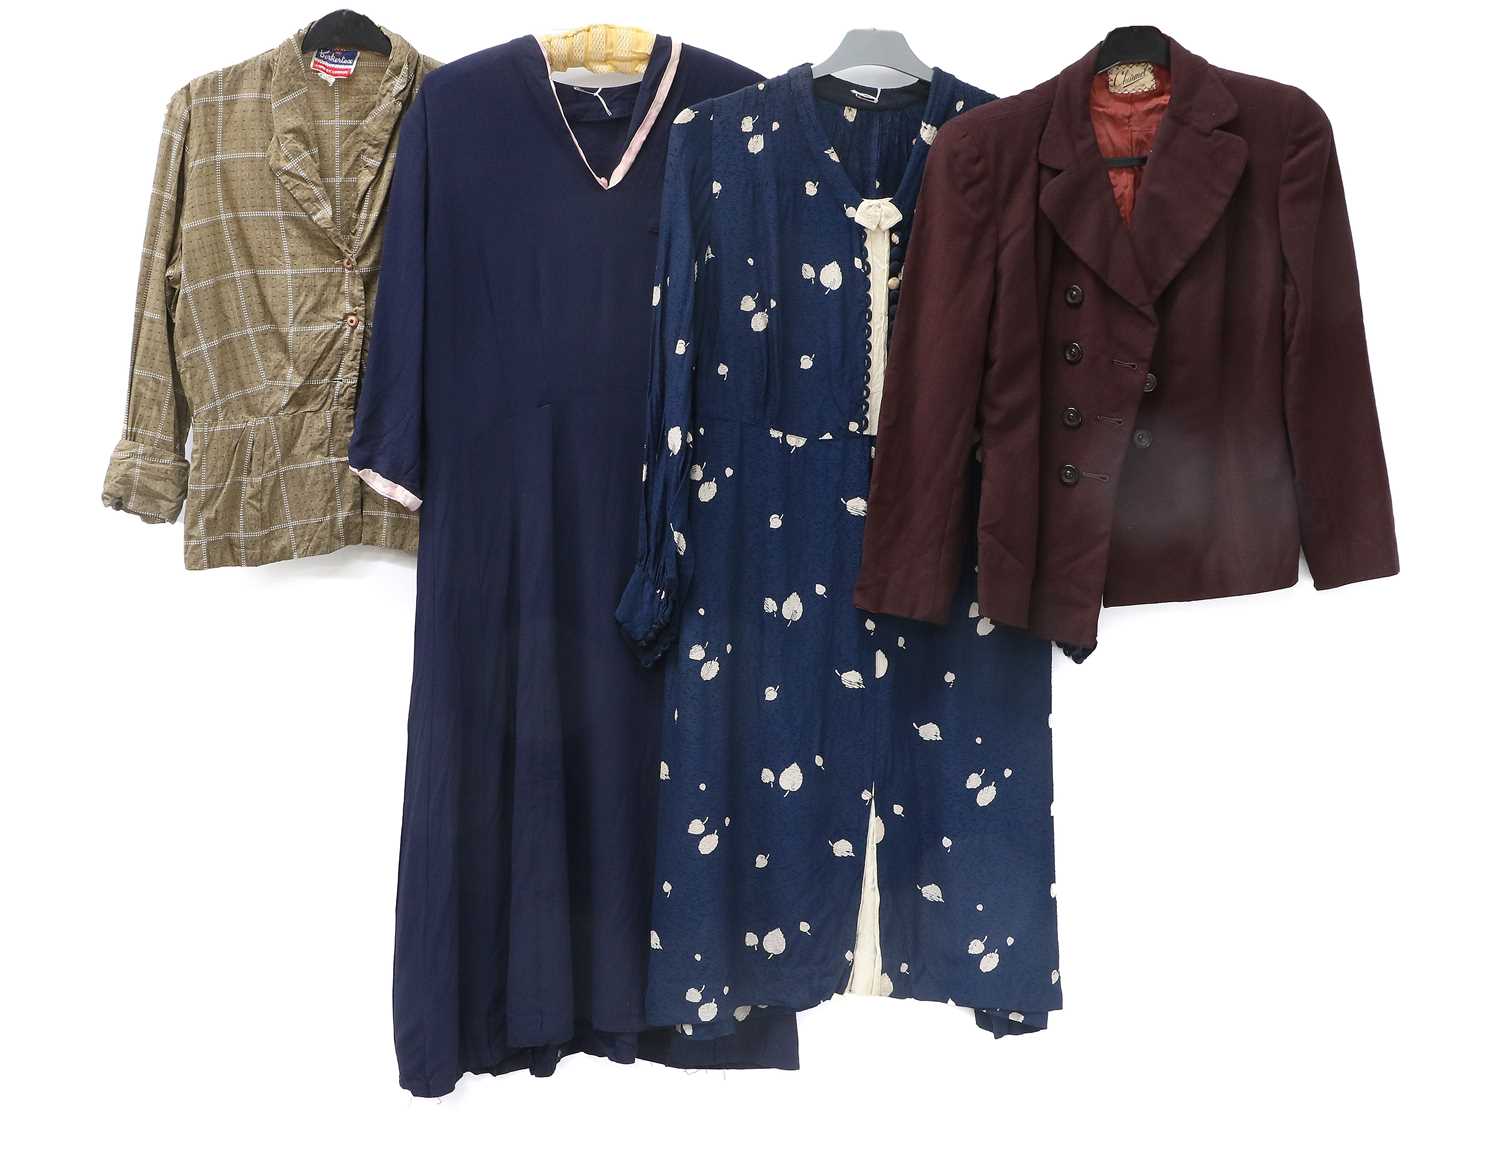 Assorted Circa 1940-50s Ladies Suits and Seperates, comprising a blue and white crepe dress with - Image 4 of 4